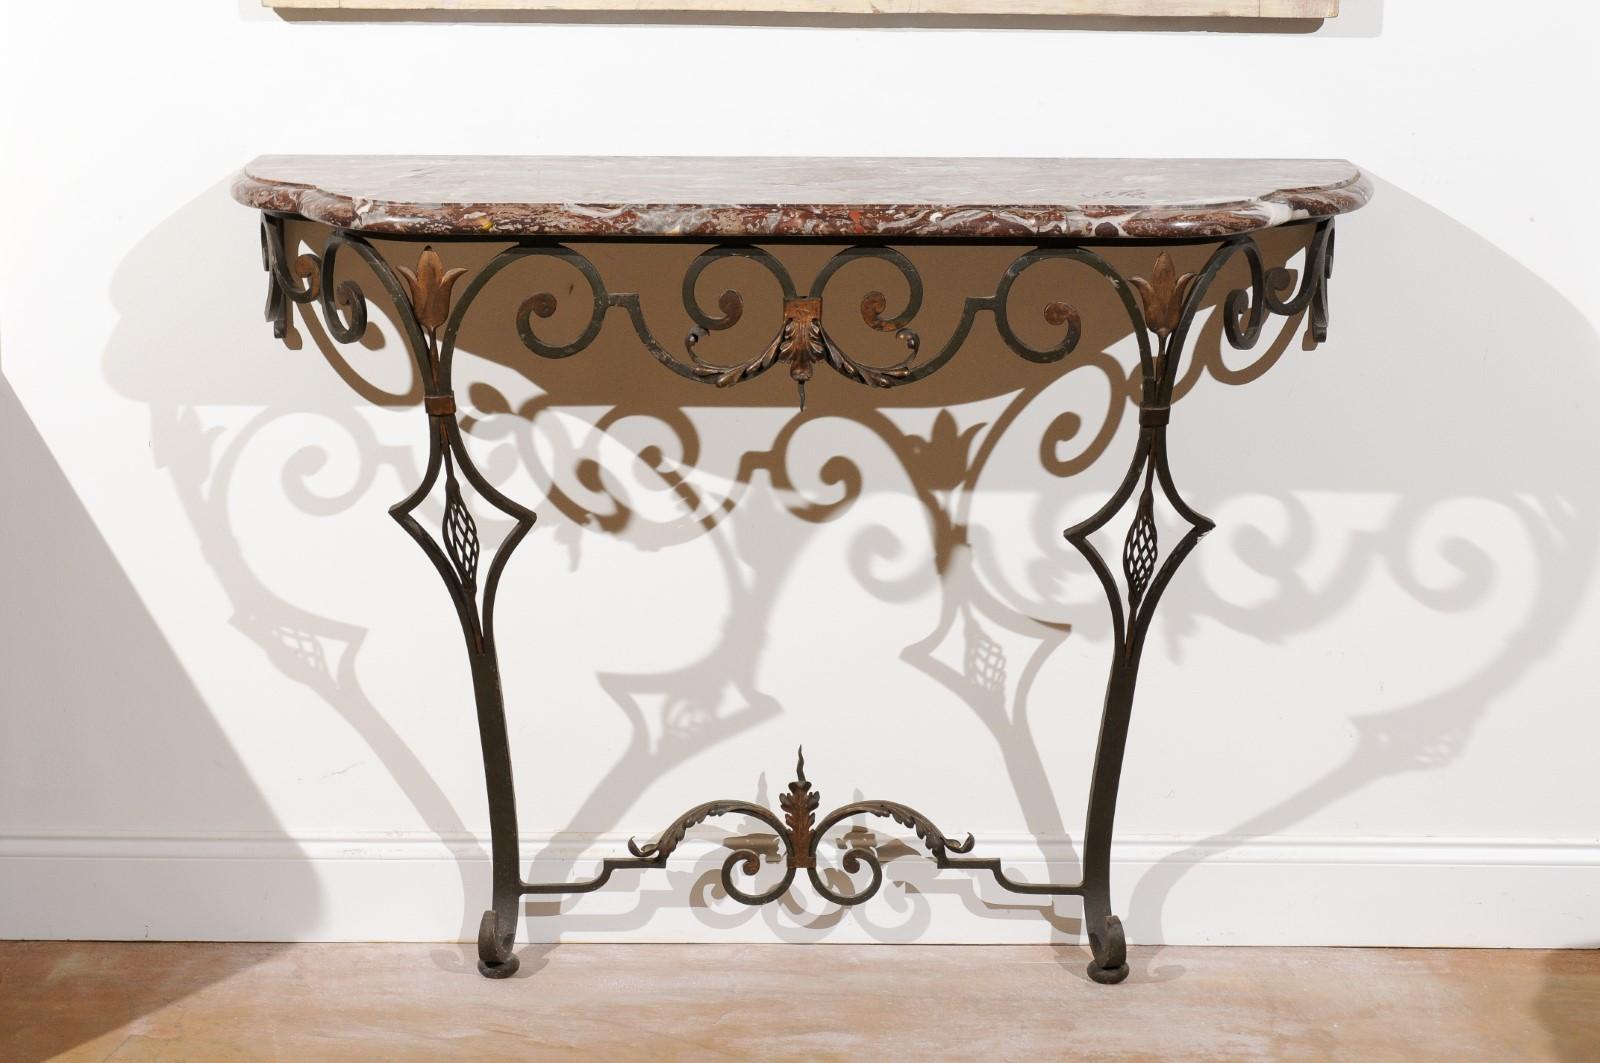 A French wrought iron console table from the early 20th century with variegated marble top and scrolling base. This exquisite French console table features a variegated red marble top with rounded edges, sitting above a graceful wrought iron